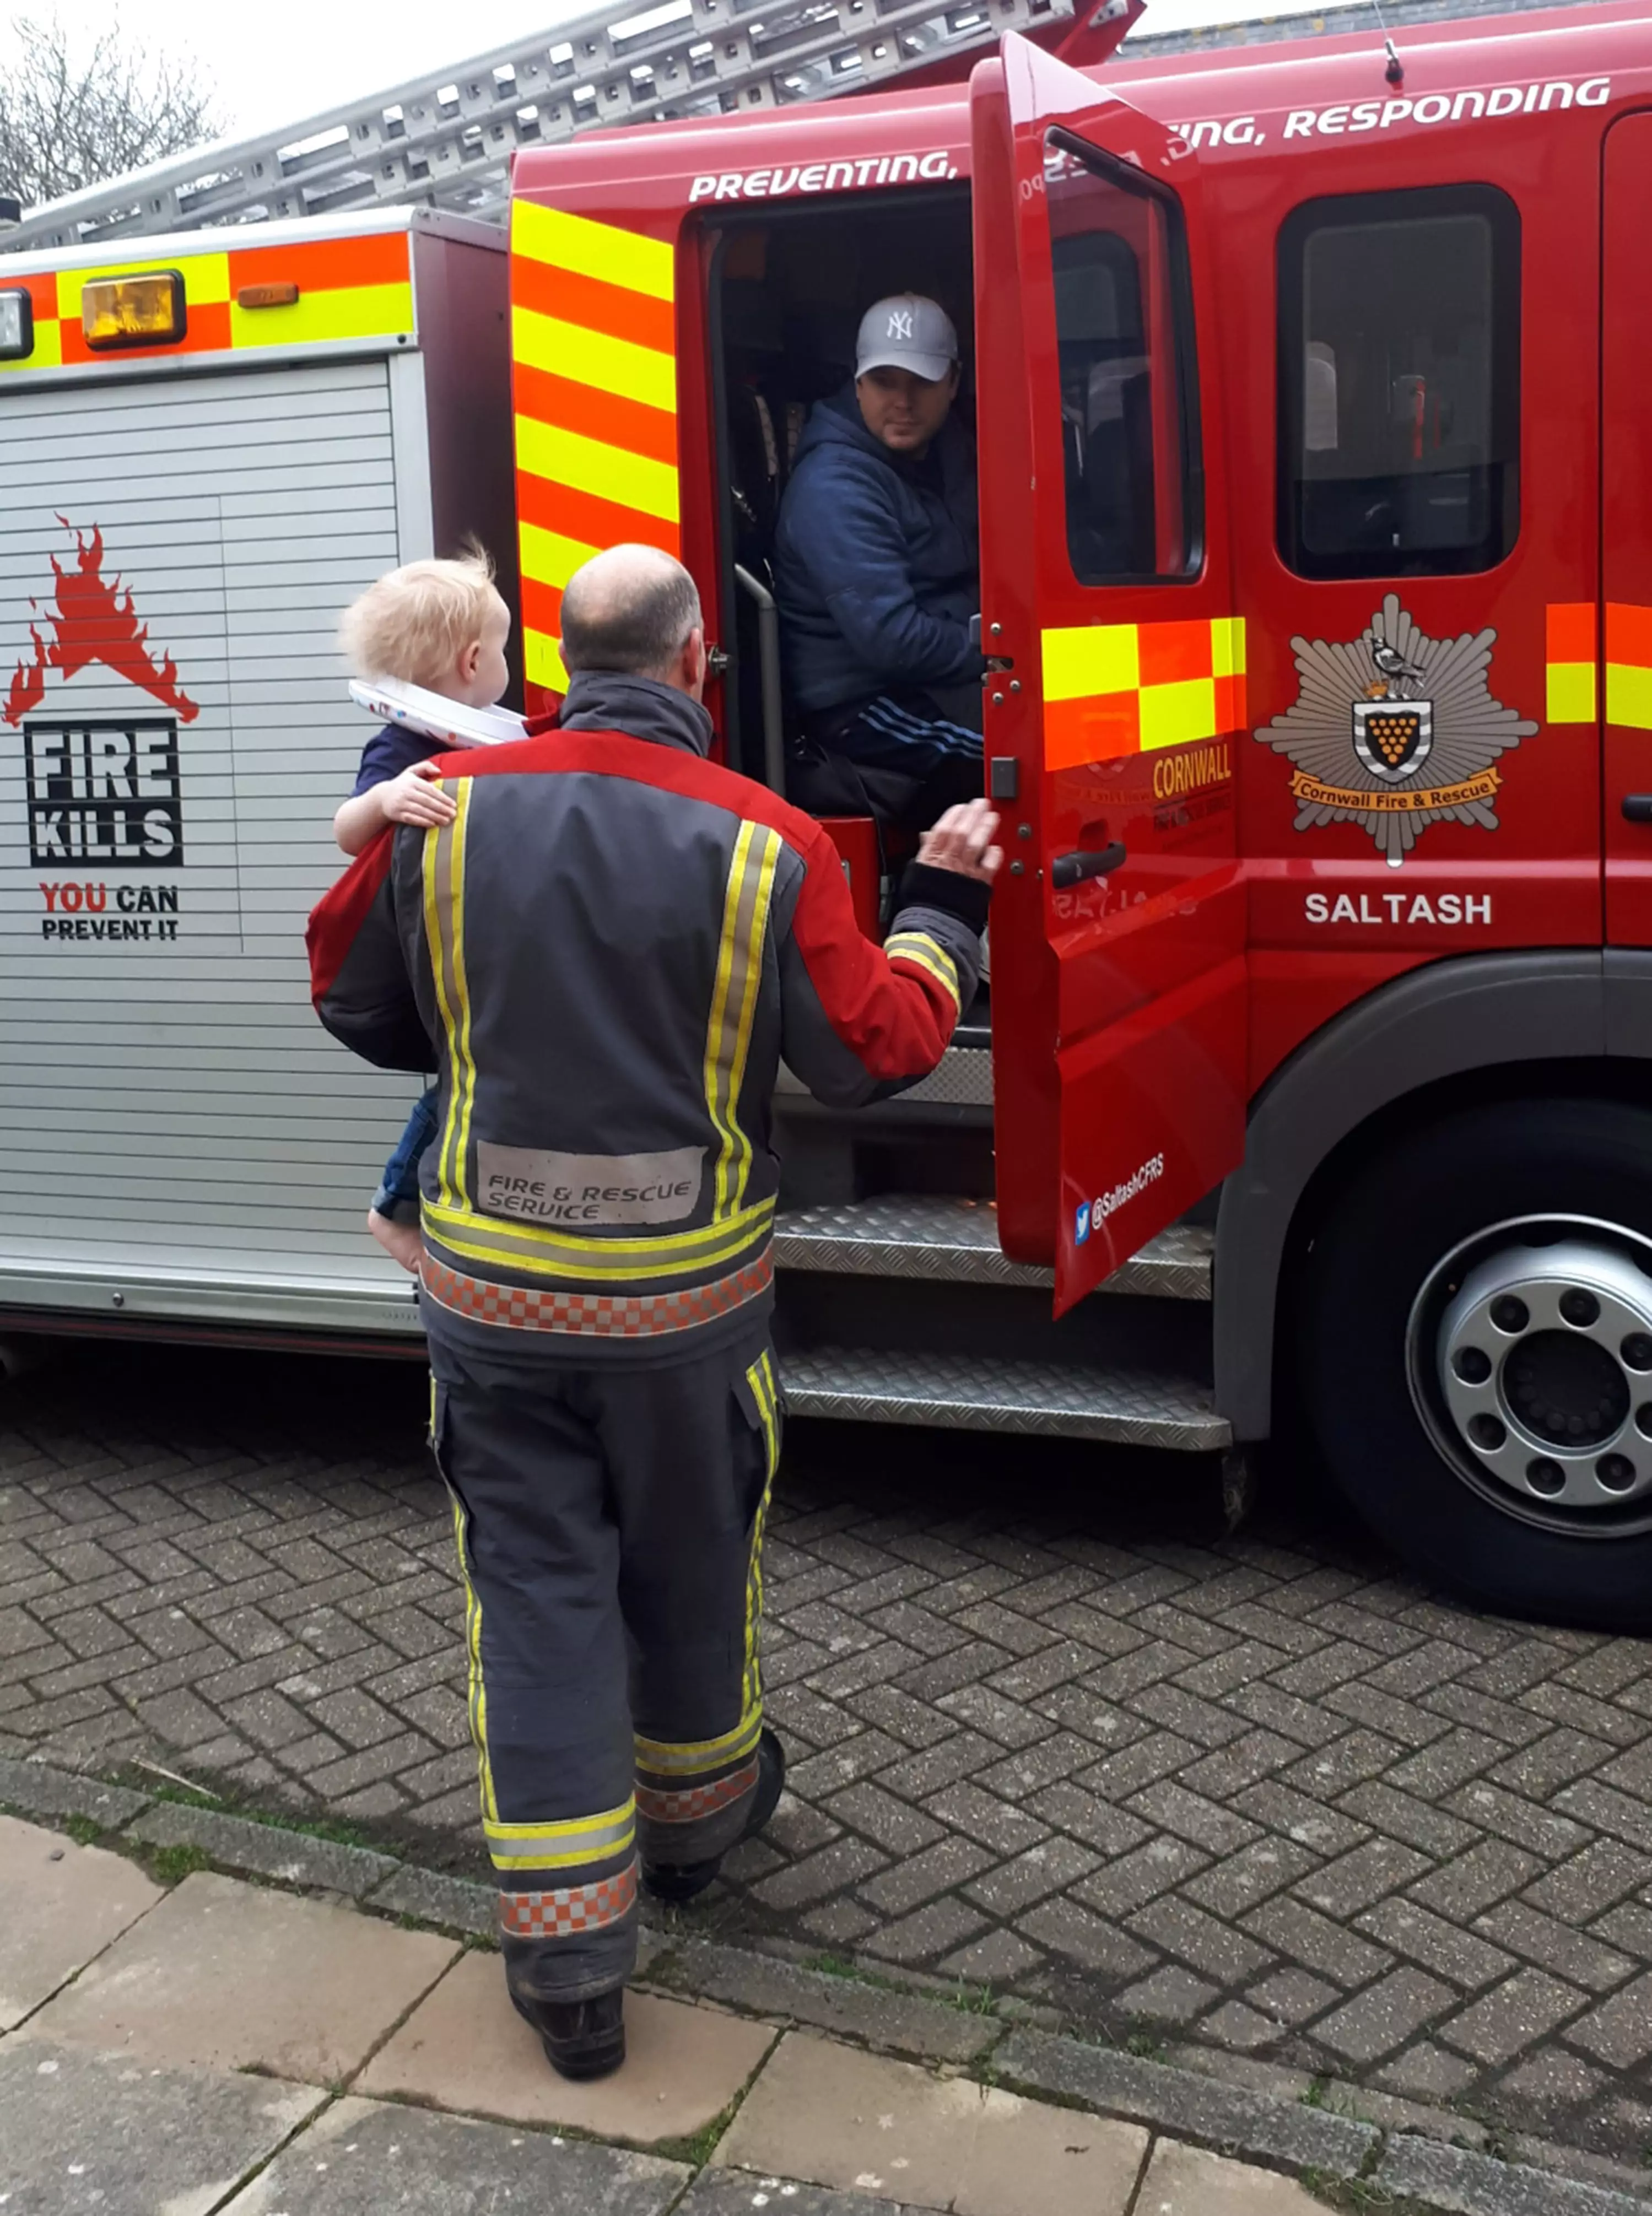 Mum Sarah was bemused to see an entire fire truck with a team of firemen arrive to rescue Flynn (